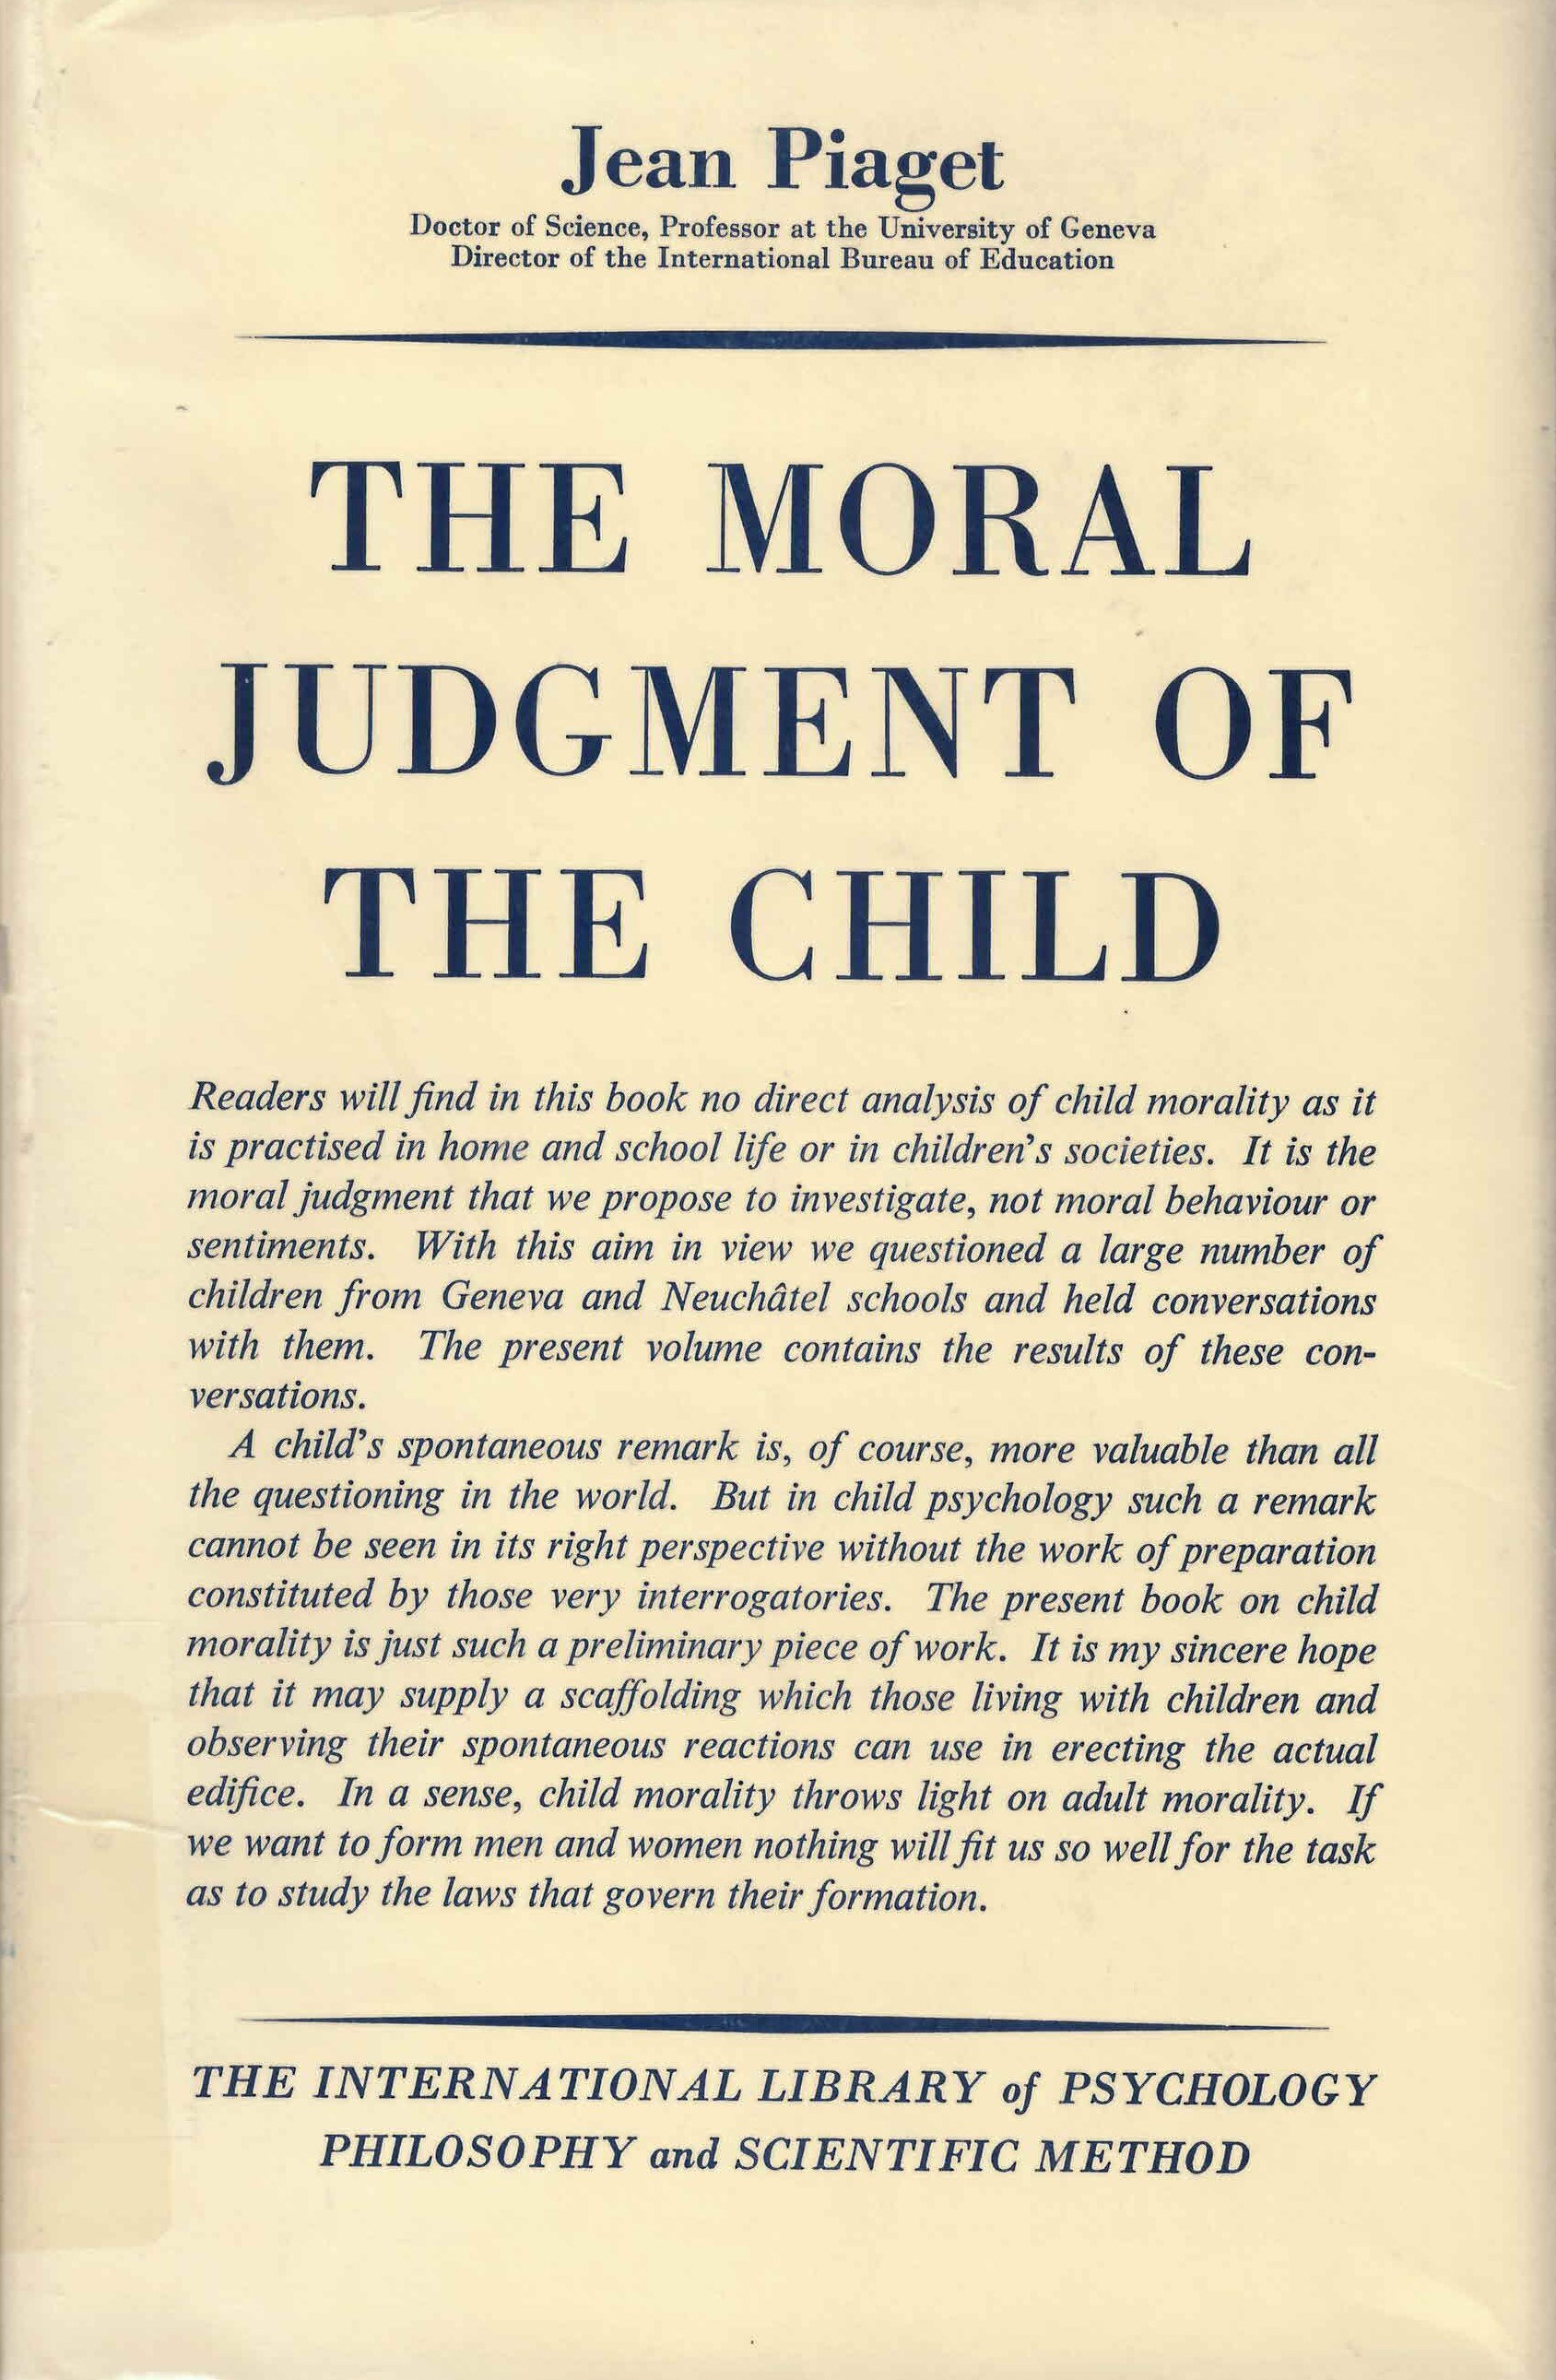 The moral judgment of the child